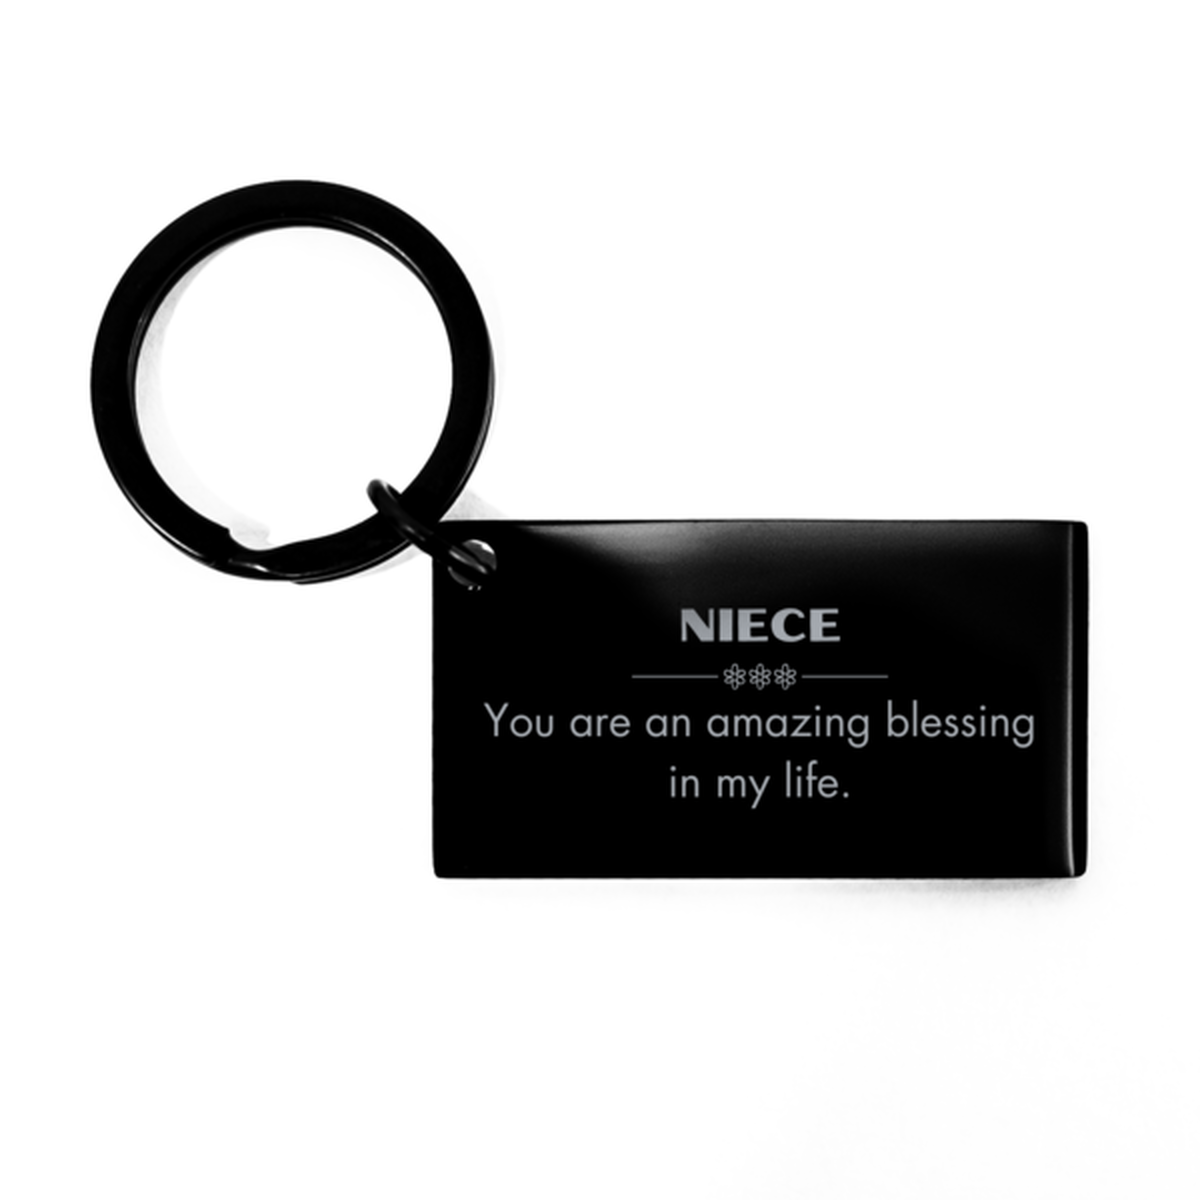 Niece Keychain, You are an amazing blessing in my life, Thank You Gifts For Niece, Inspirational Birthday Christmas Unique Gifts For Niece